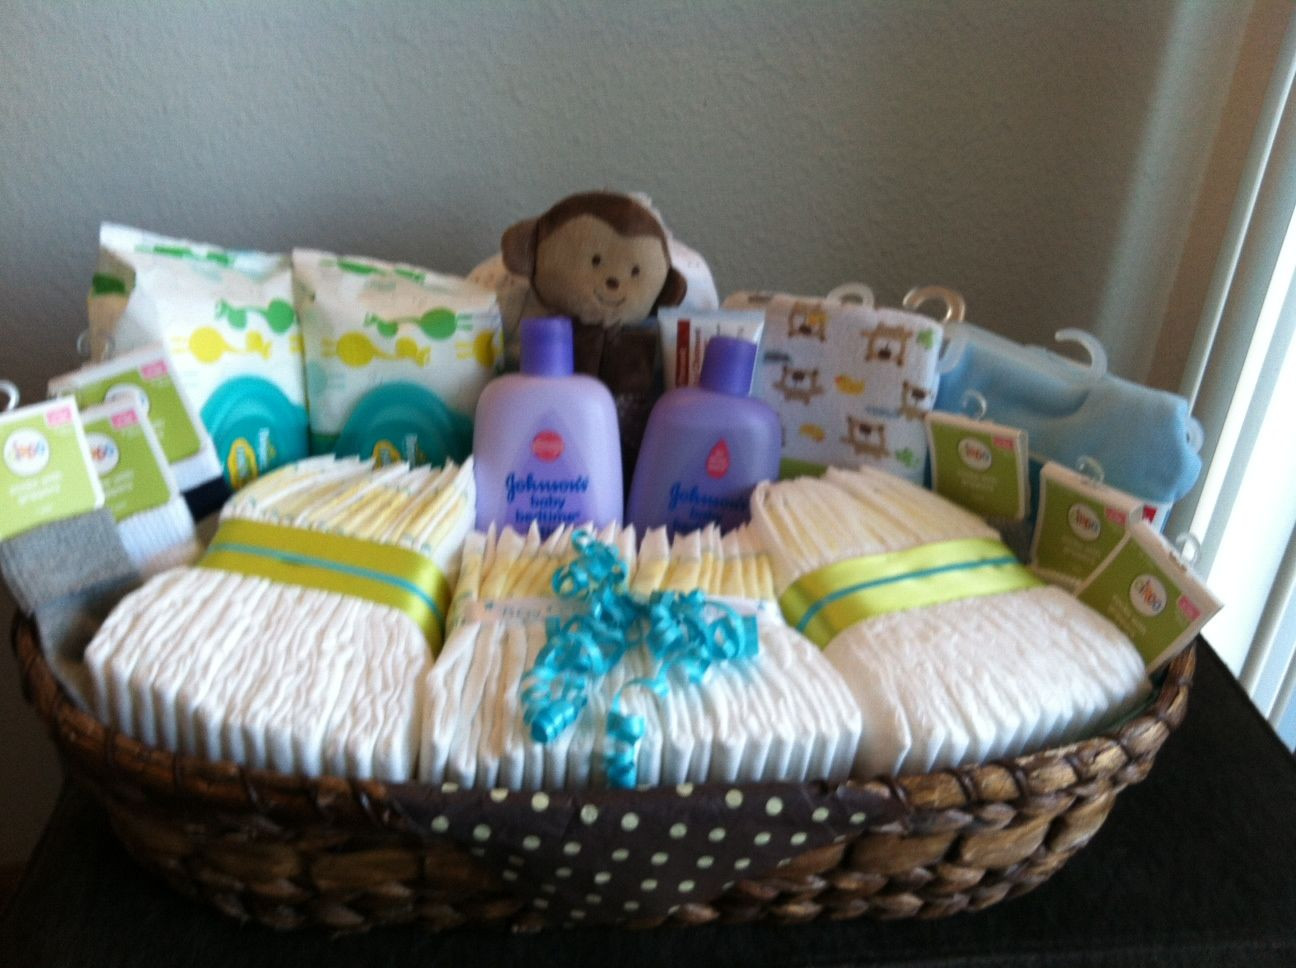 Cute Baby Shower Gift Ideas For Boys
 DIY Baby Shower Gift Basket line a basket with